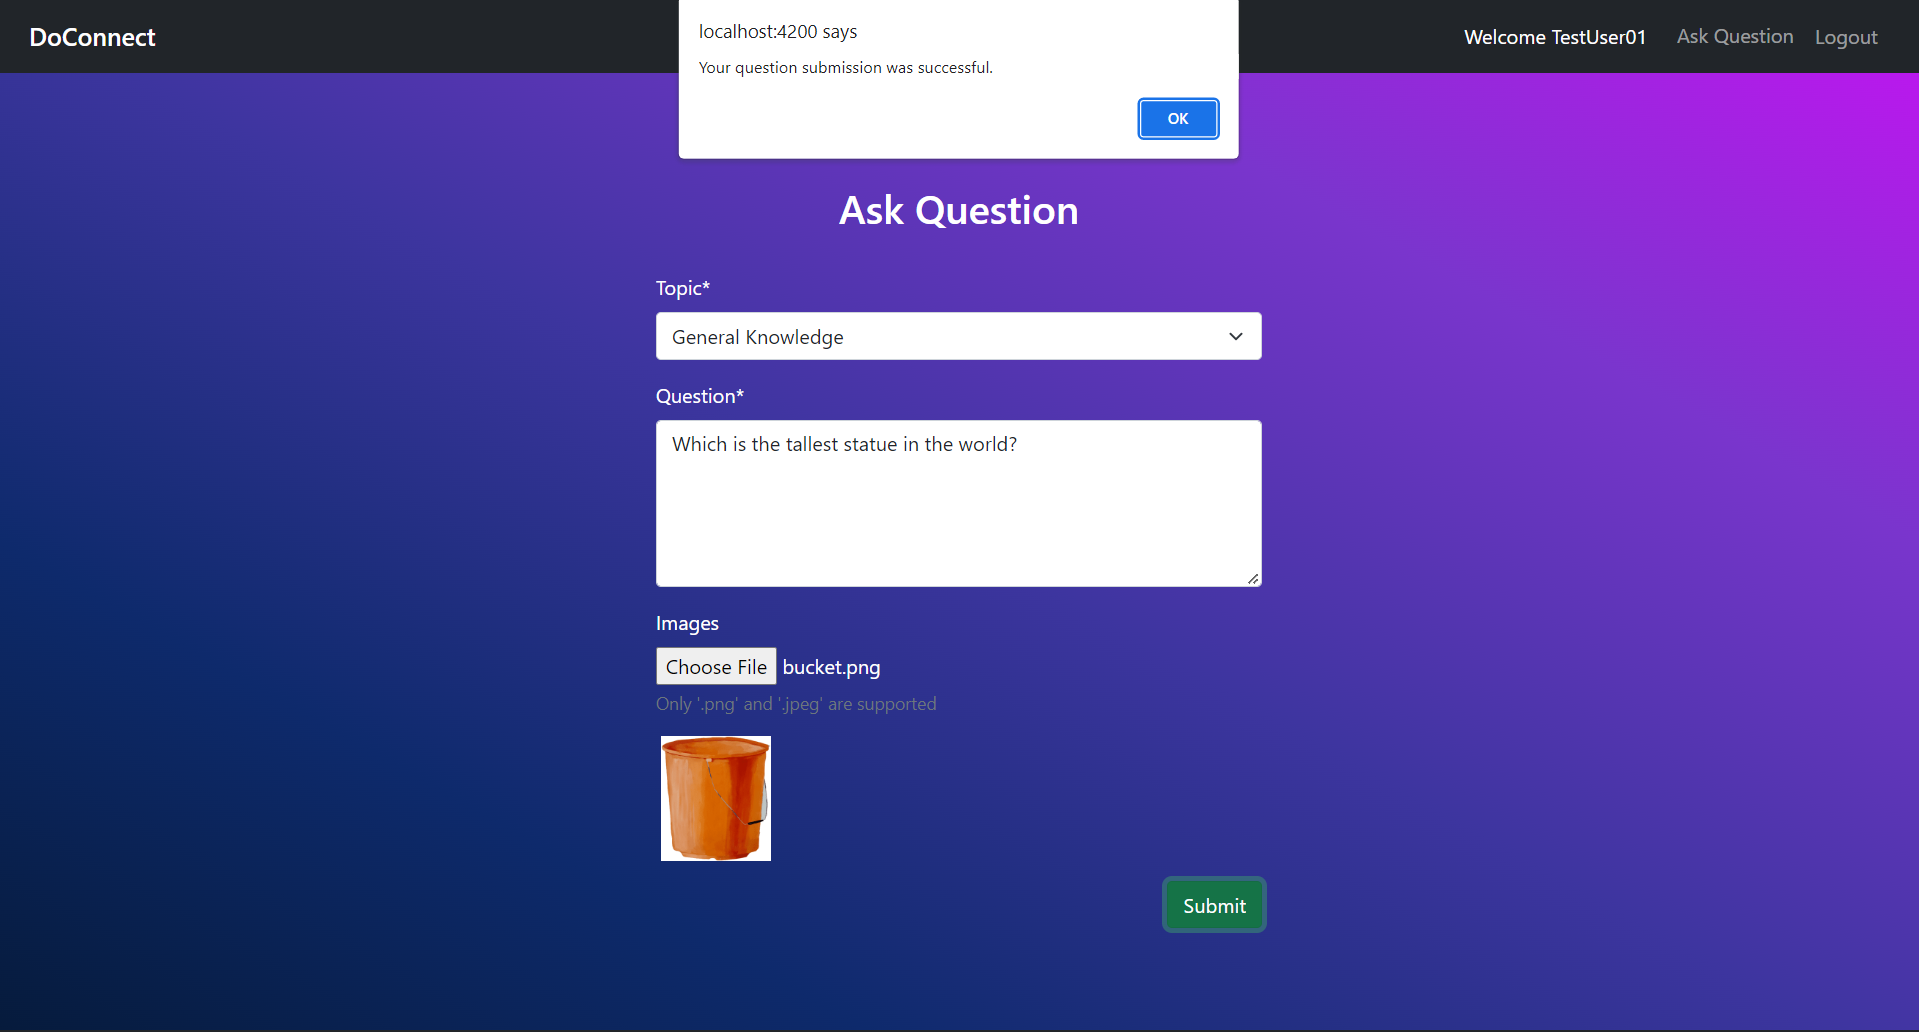 Ask Question Page Submission Successful